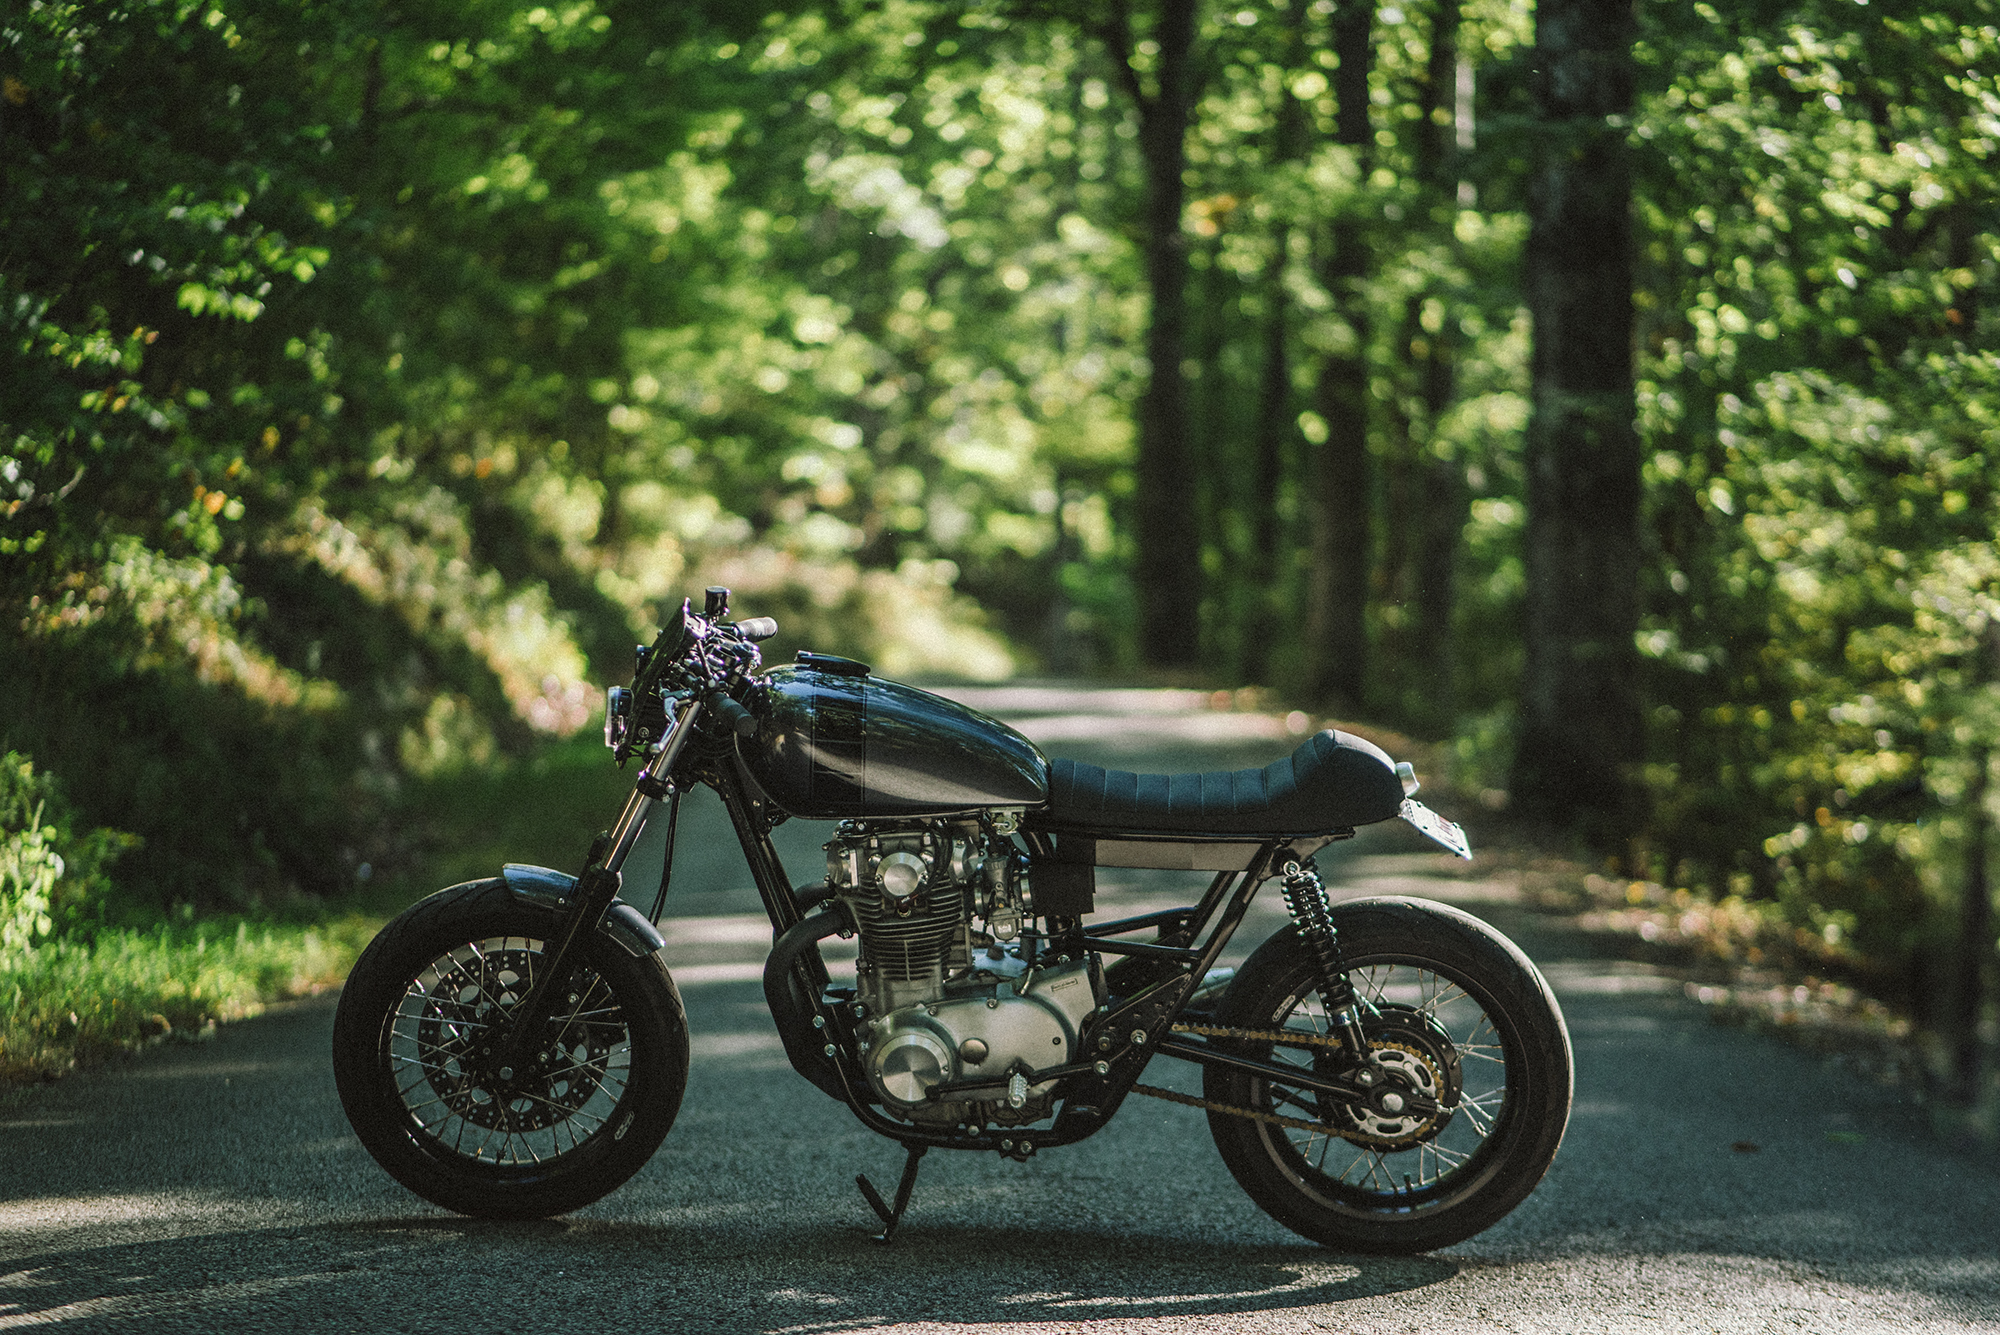 XS650 from Analog Motorcycles